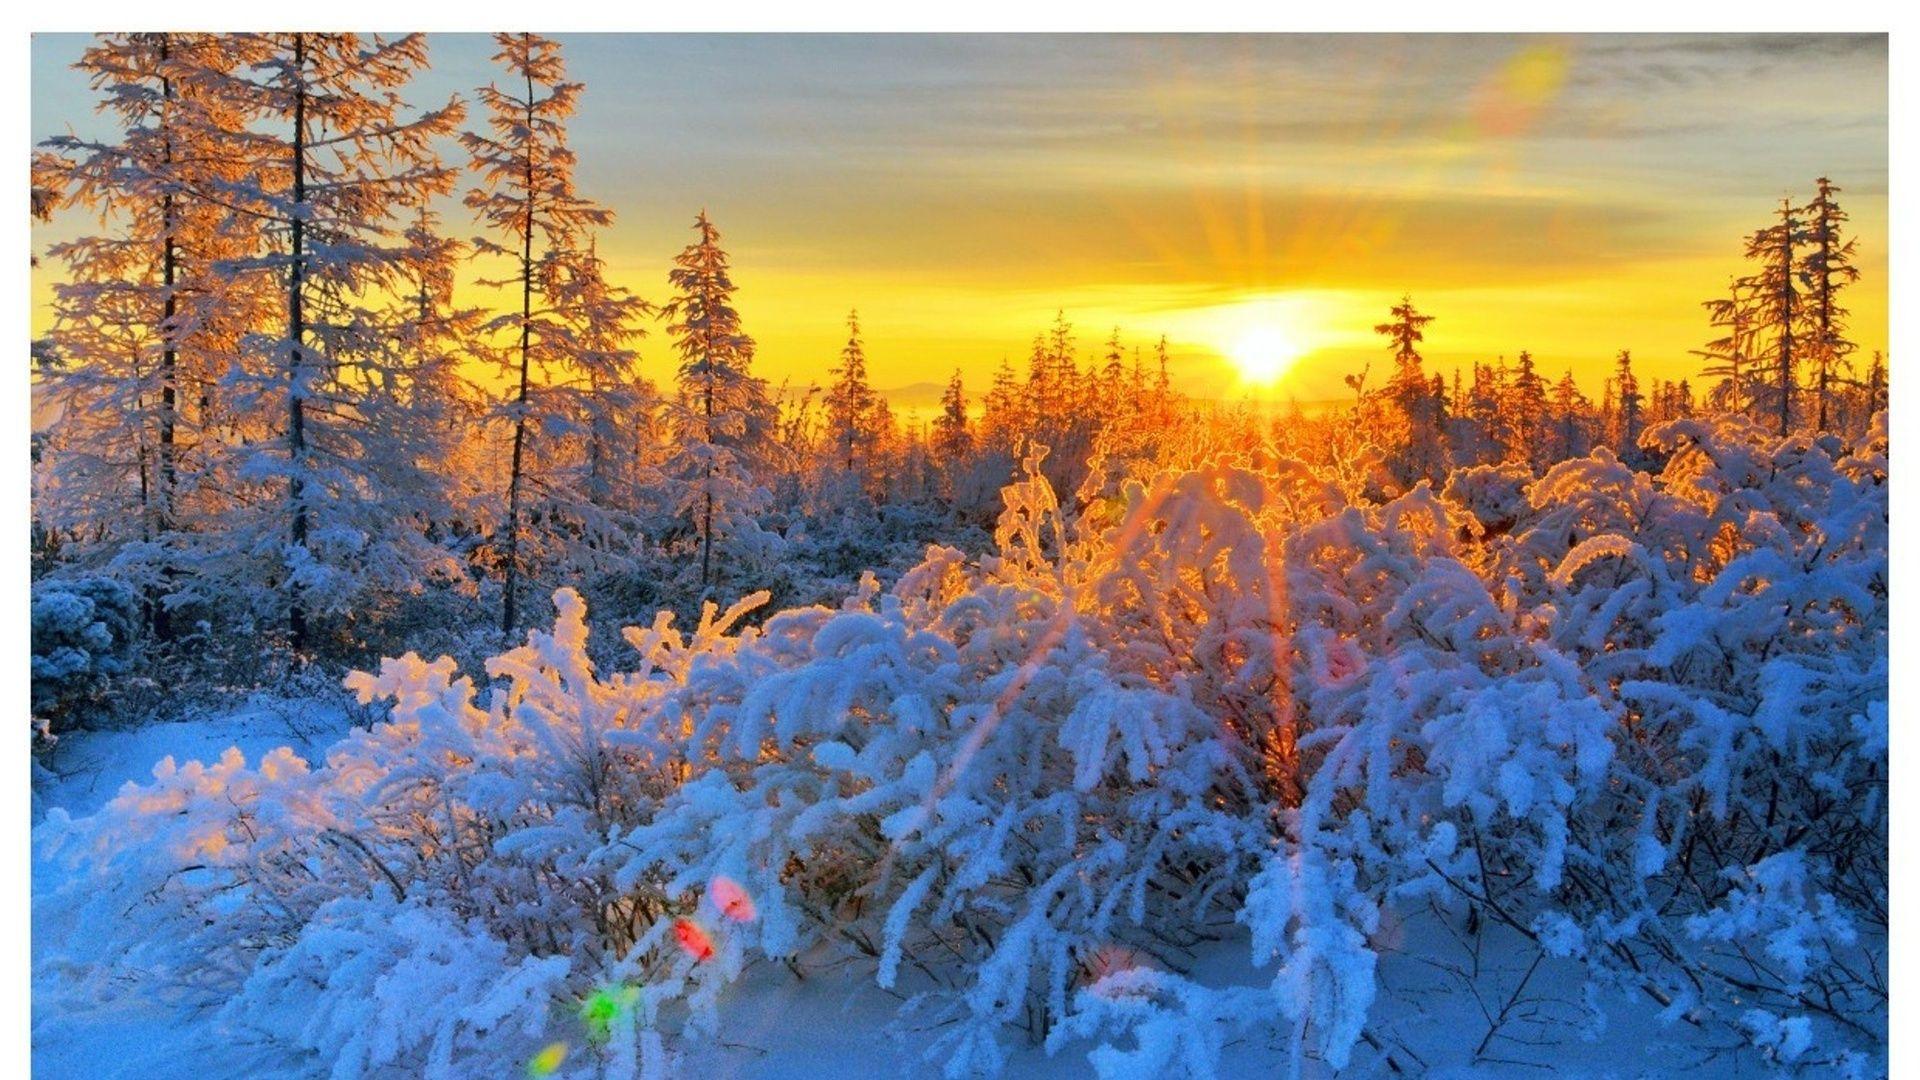 Snow Sunrise Wallpapers Top Free Snow Sunrise Backgrounds